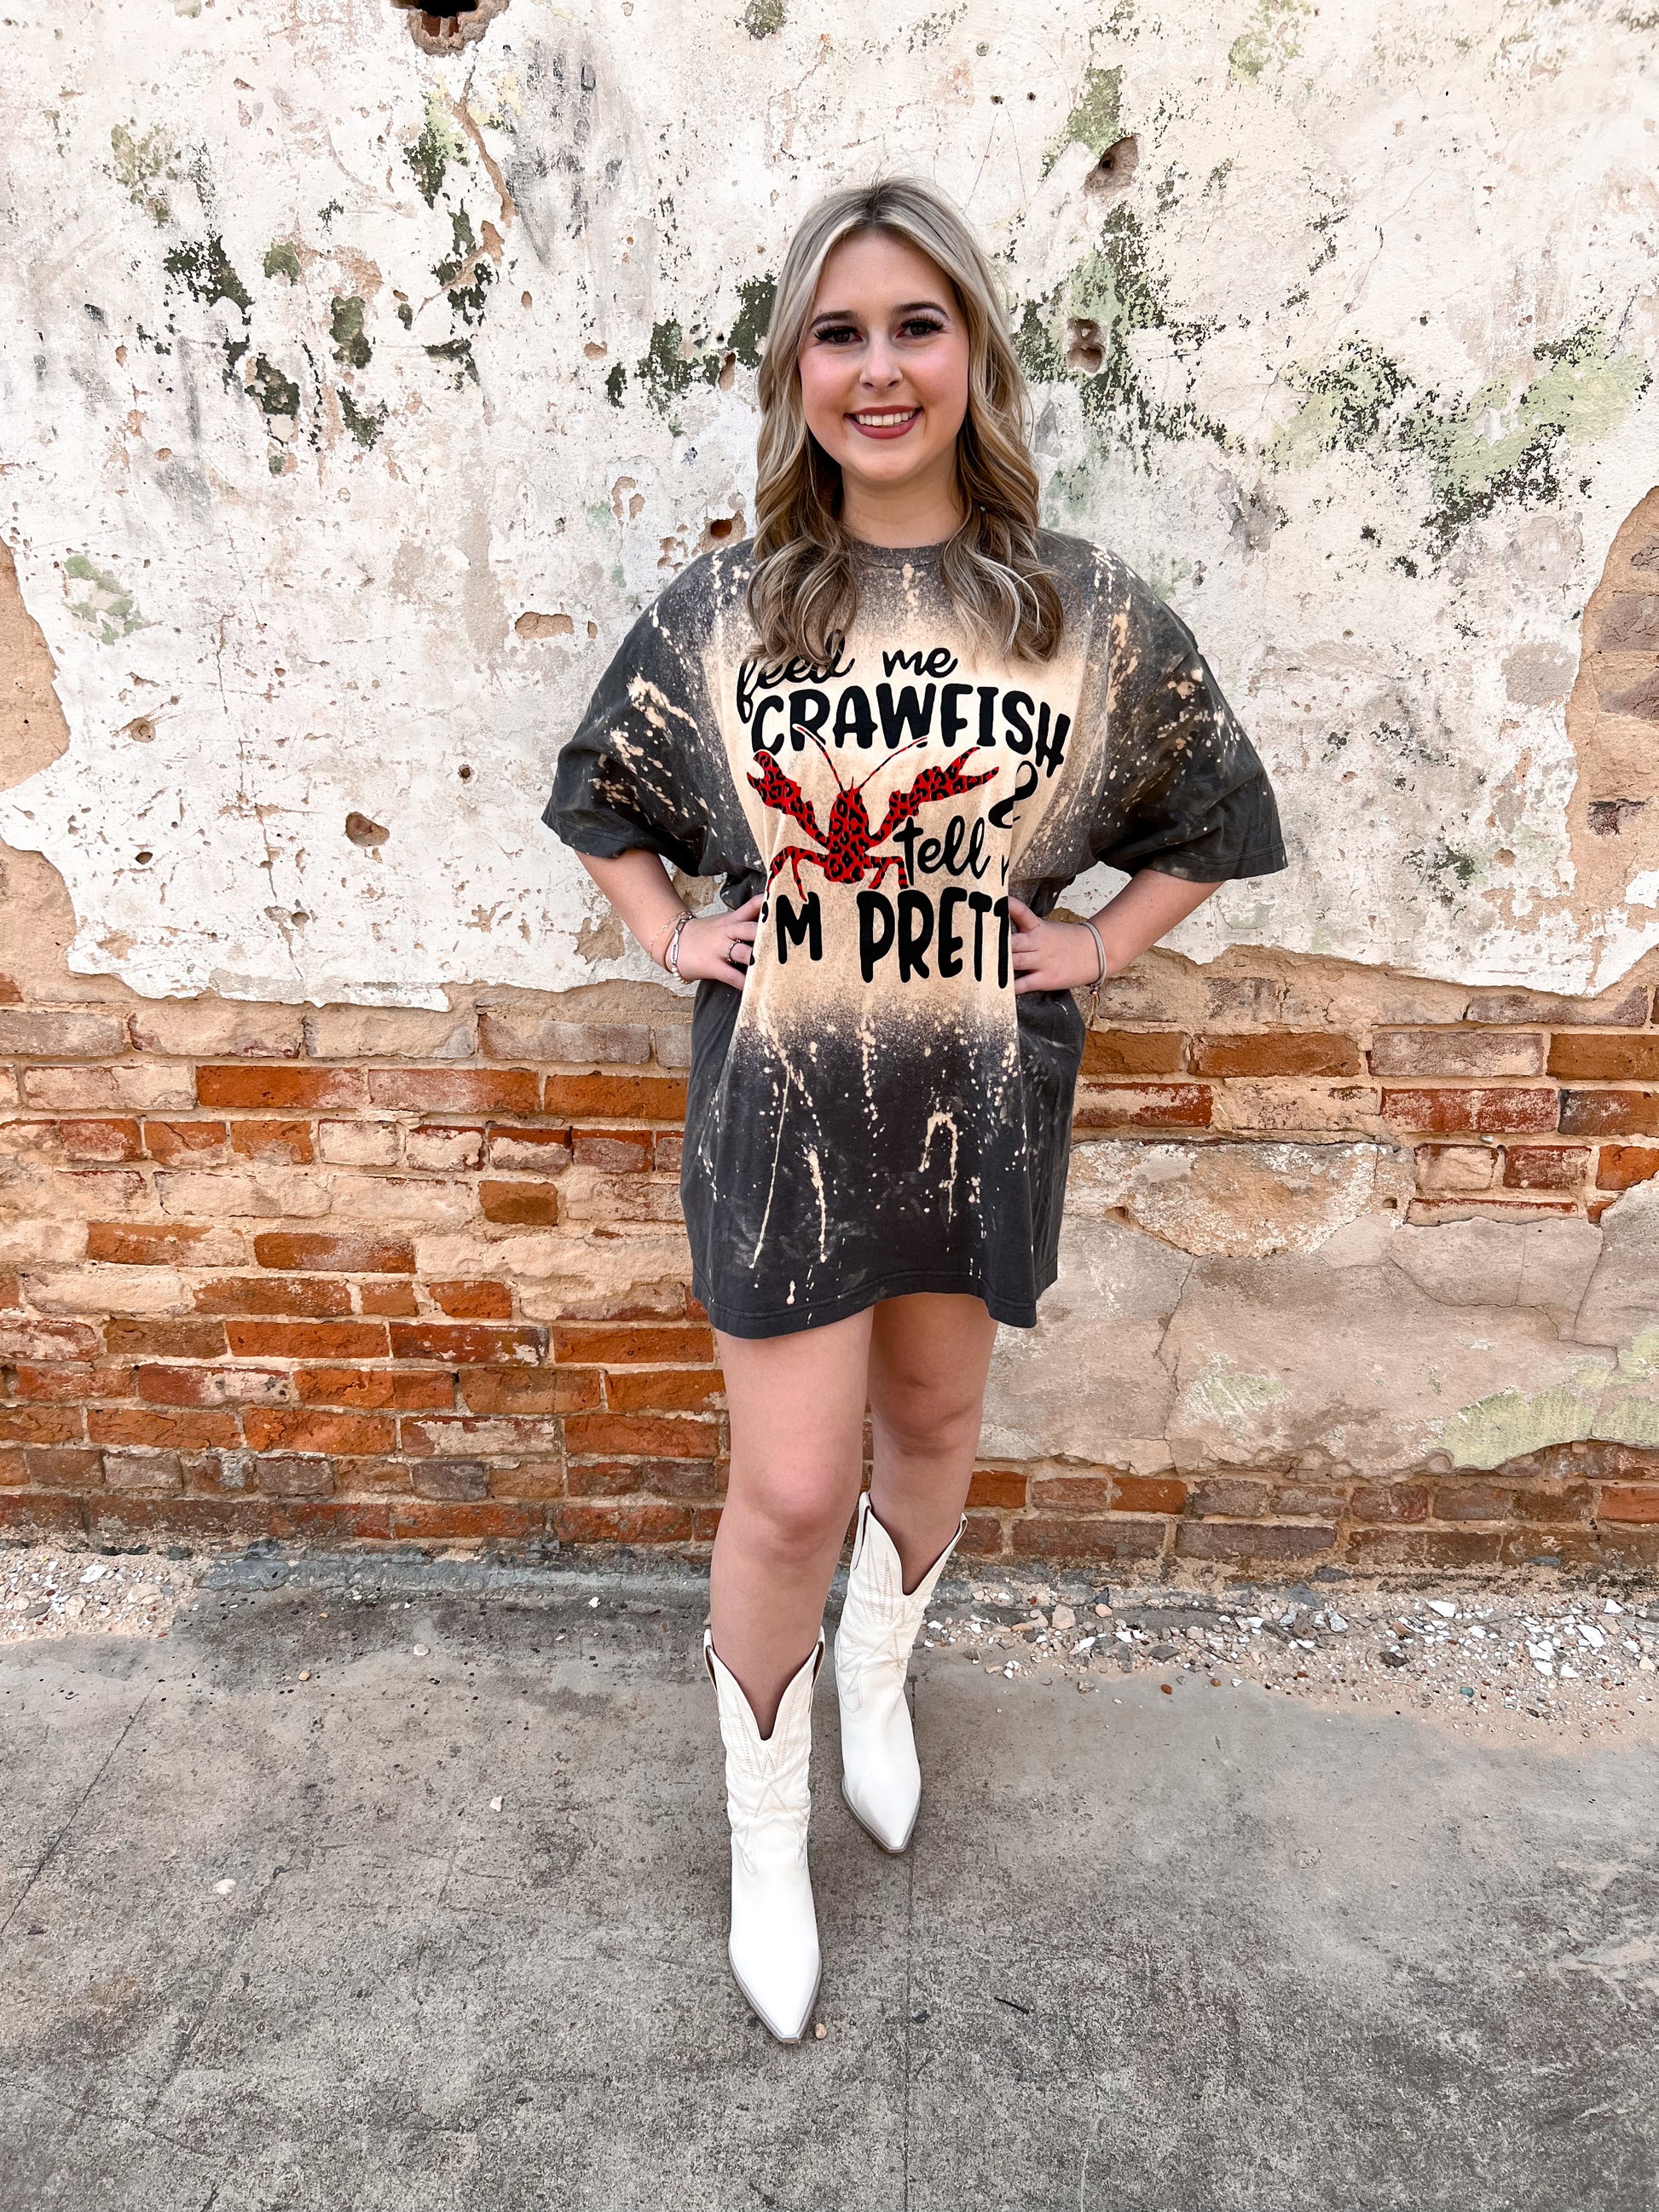 Feed Me Crawfish and Tell Me I'm Pretty Tee Shirt-Apparel & Accessories-Bling-A-Gogo-Max Retail-One Size-The Twisted Chandelier